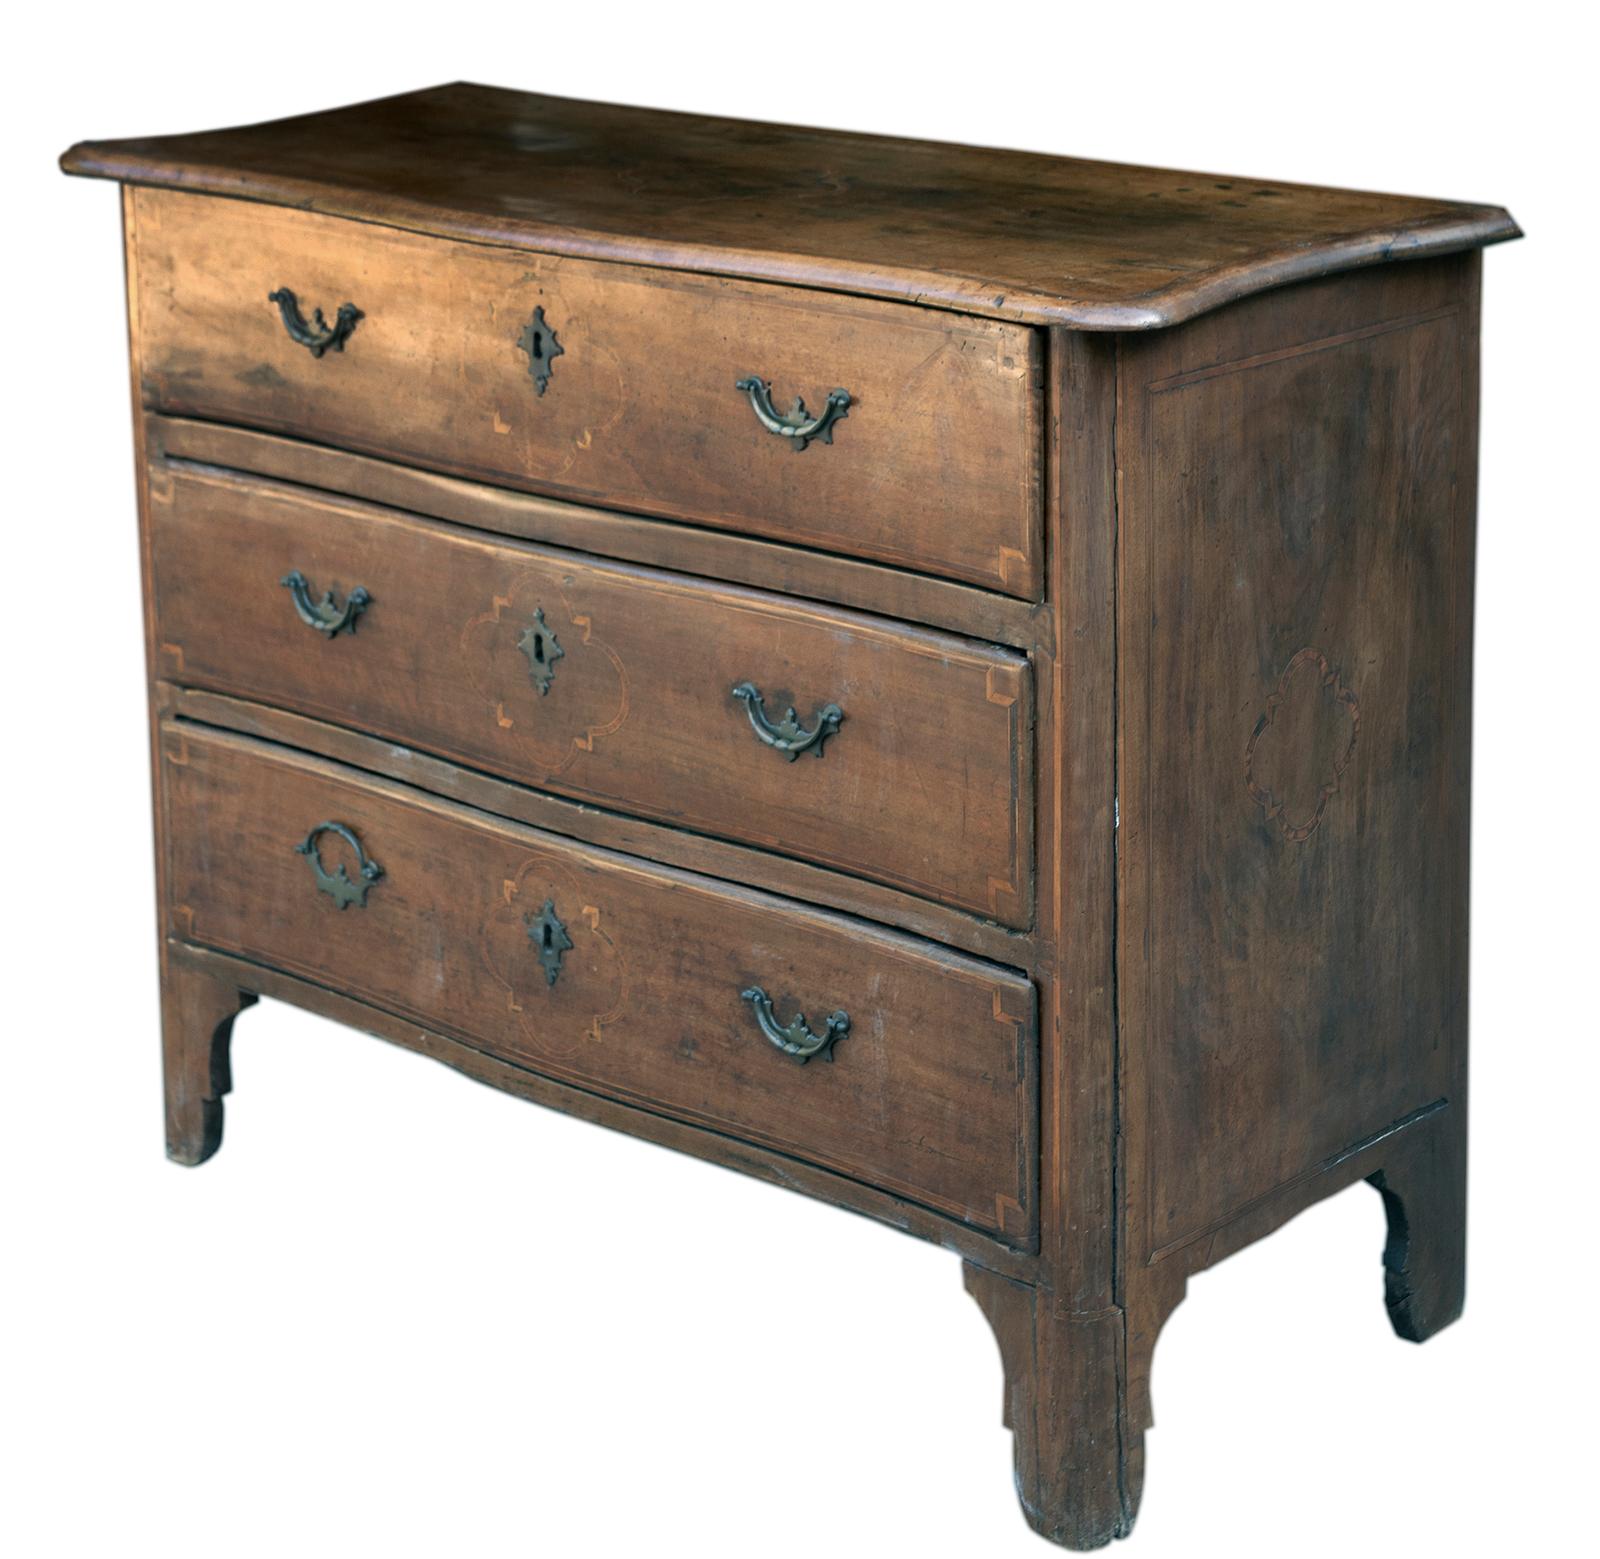 Stunning, 18th century Italian chest with three full sized lined drawers. The tope sides & drawers are adorned with geometric marquetry, bronze pulls & escutcheon keyplates.